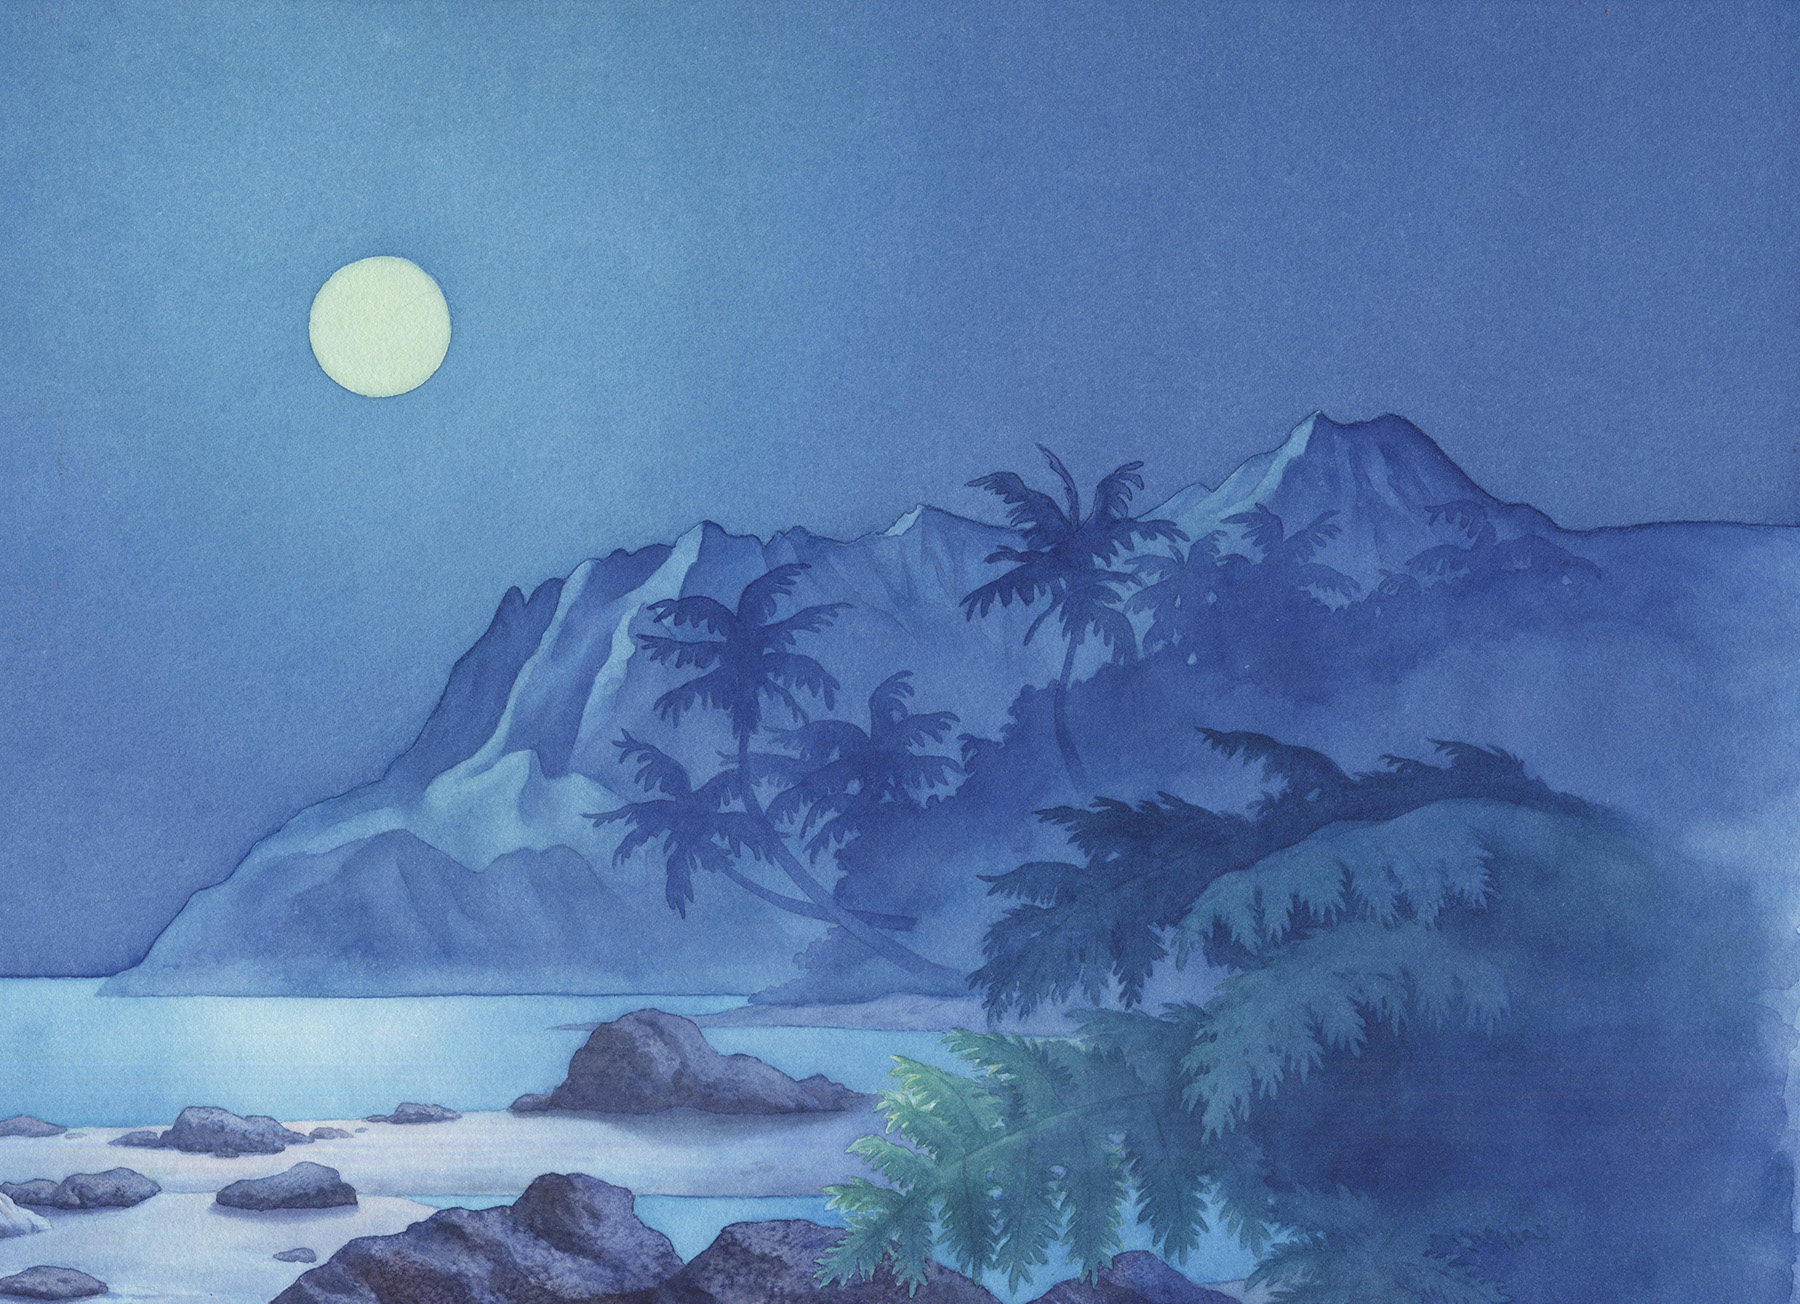 Disney Animation in the scenery of Lilo & Stitch with these original background from the film, courtesy of the Walt Disney Animation Research Library